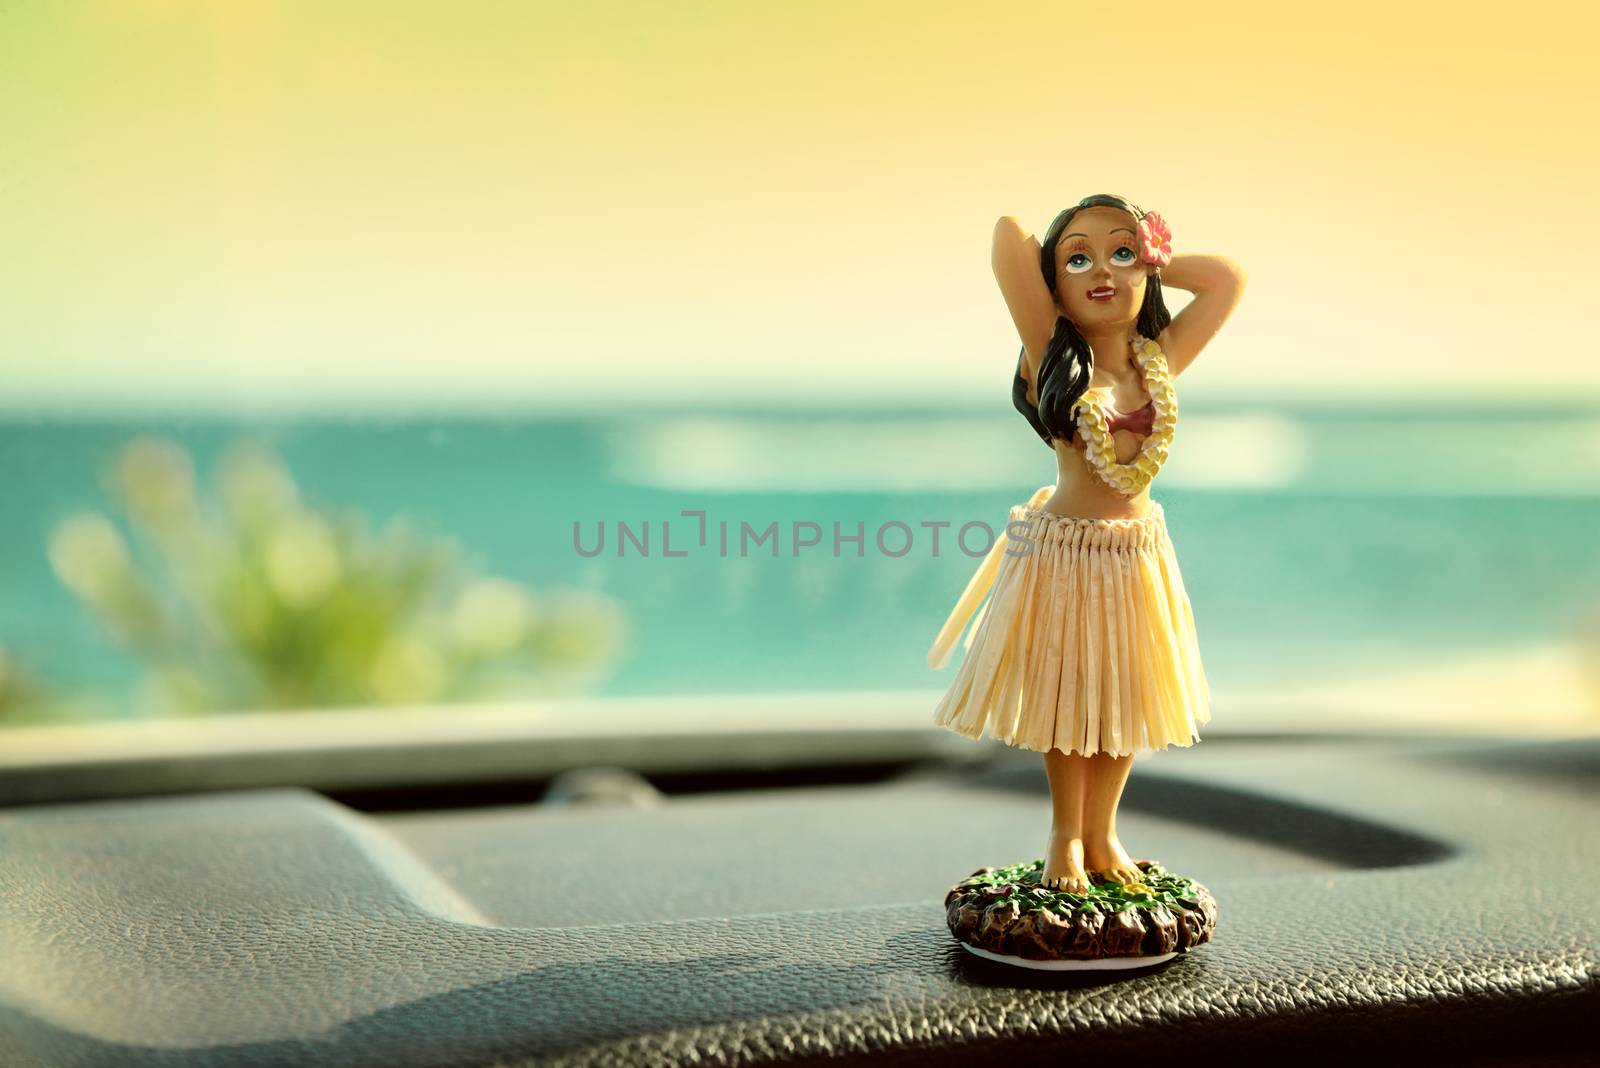 Hula dancer doll on Hawaii car road trip. Doll dancing on the dashboard in front of the ocean. Tourism and Hawaiian travel freedom concept.